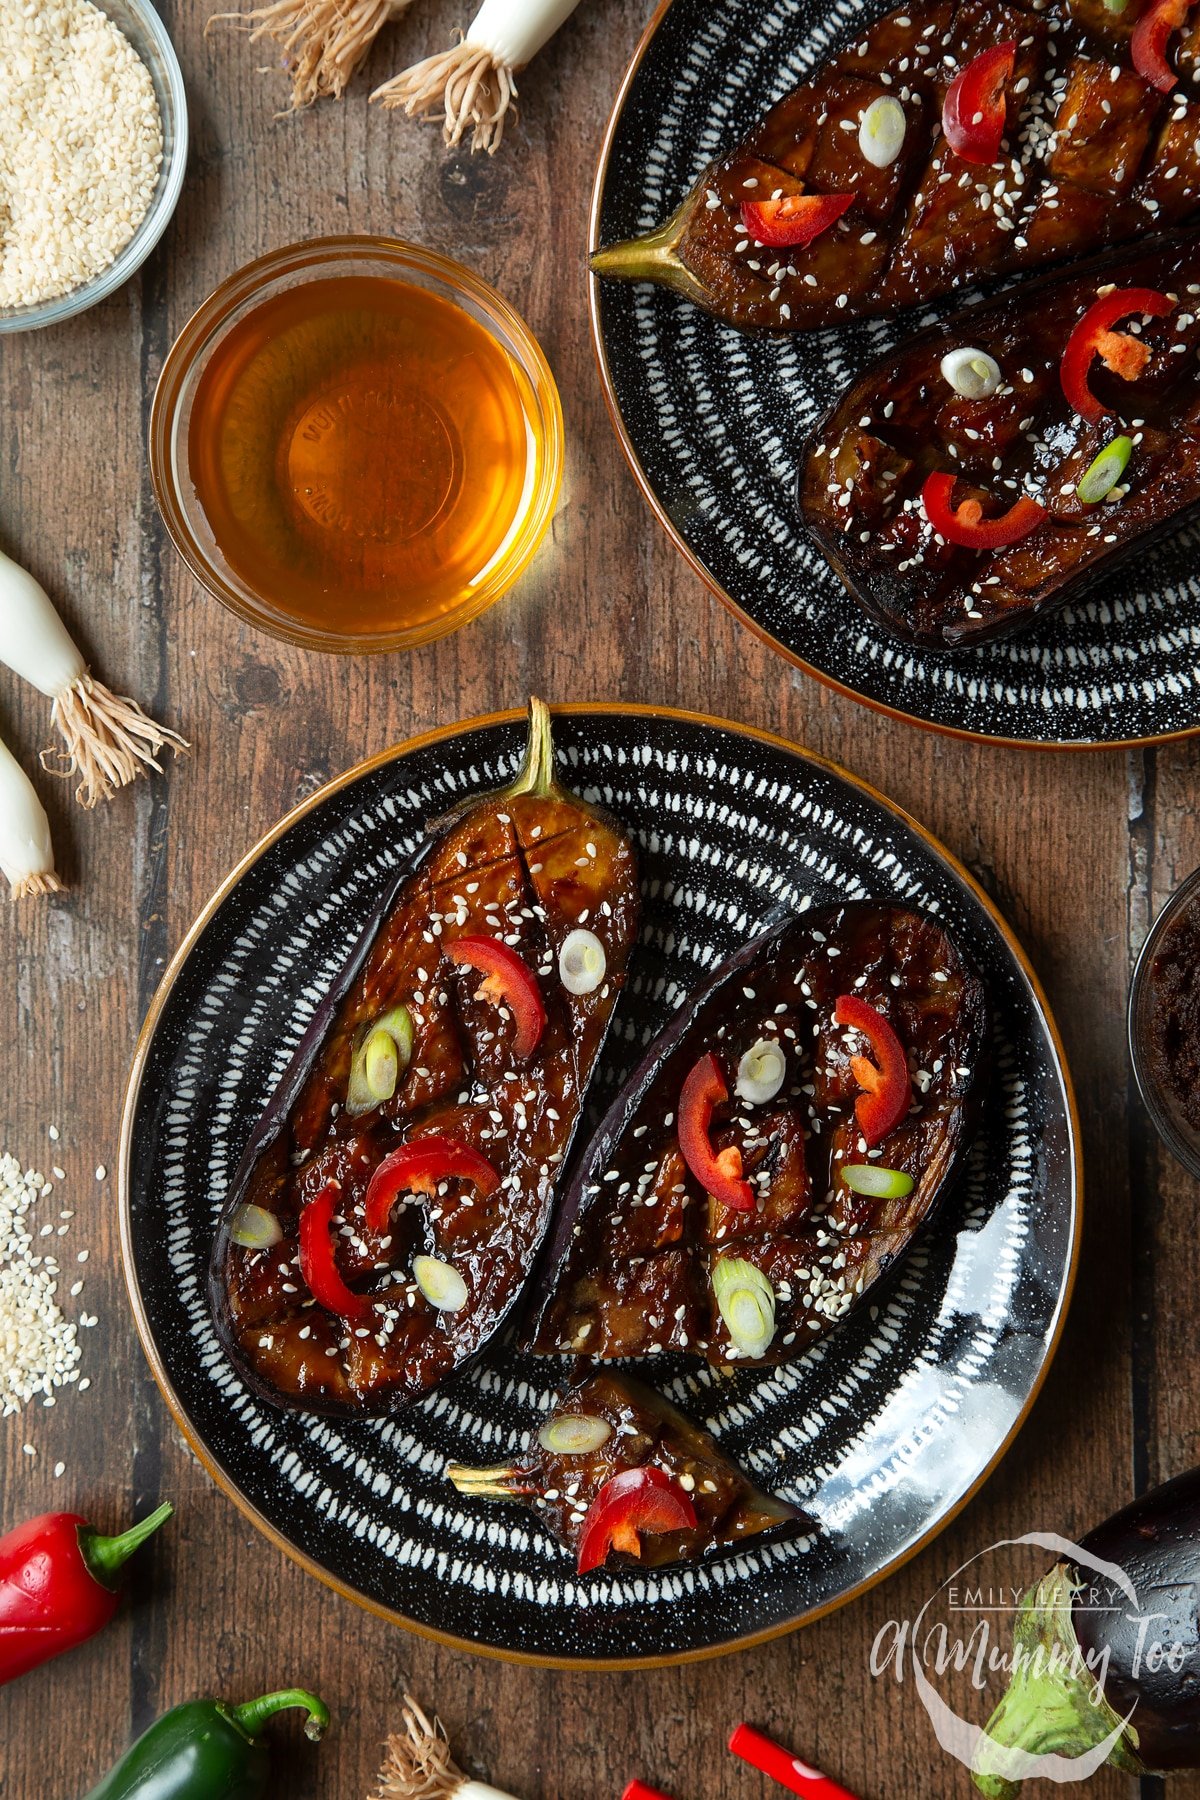 Two slices of miso aubergine on a plate, topped with chilli, springs onions and sesame seeds. A piece has been sliced off.